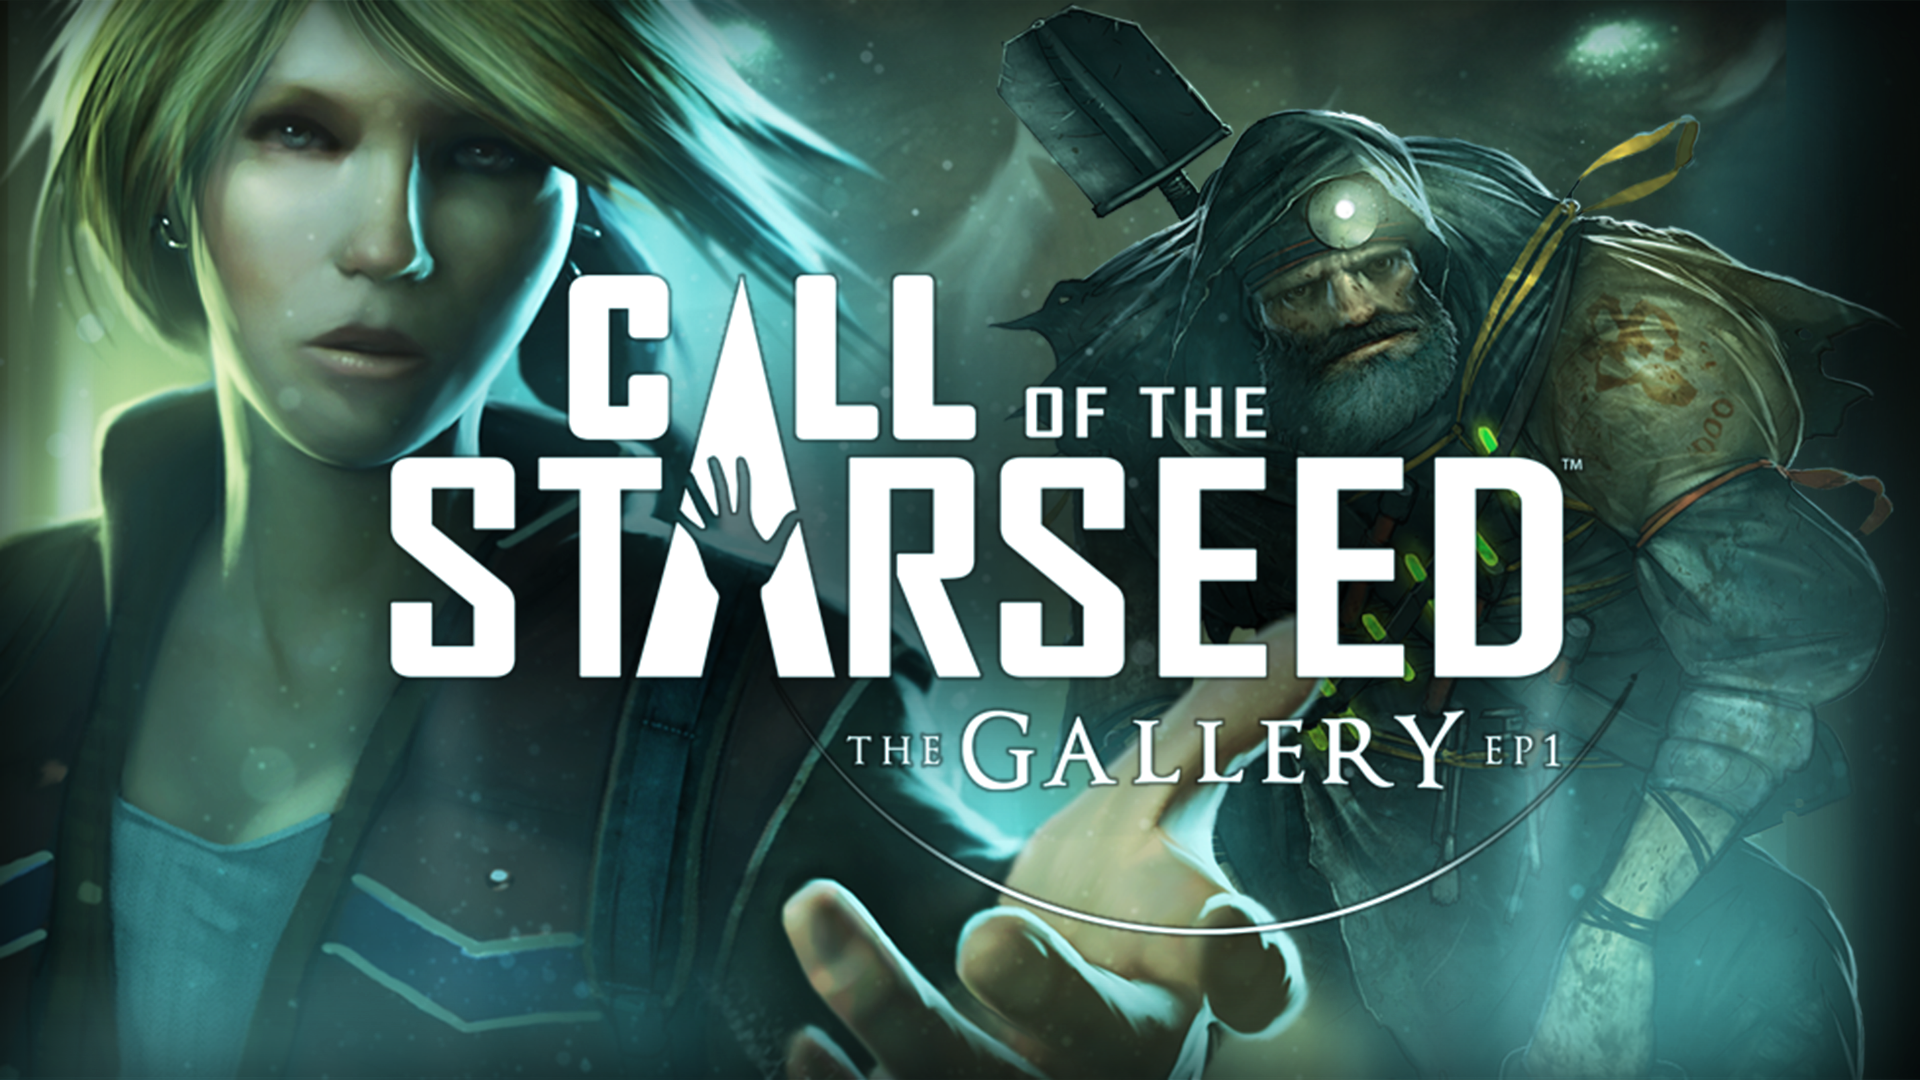 the-gallery-episode-1-call-of-the-starseed-unity-connect